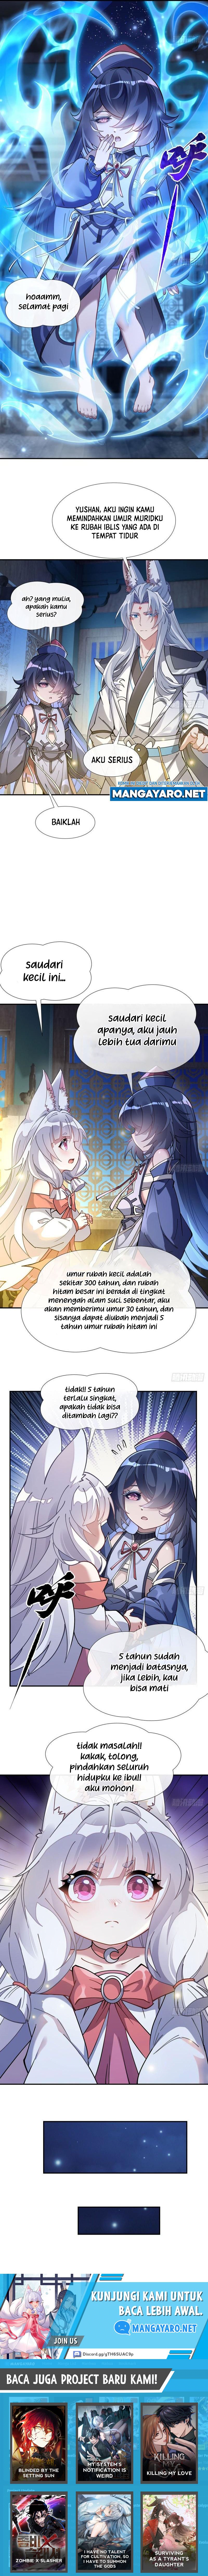 Dilarang COPAS - situs resmi www.mangacanblog.com - Komik my female apprentices are all big shots from the future 178 - chapter 178 179 Indonesia my female apprentices are all big shots from the future 178 - chapter 178 Terbaru 7|Baca Manga Komik Indonesia|Mangacan